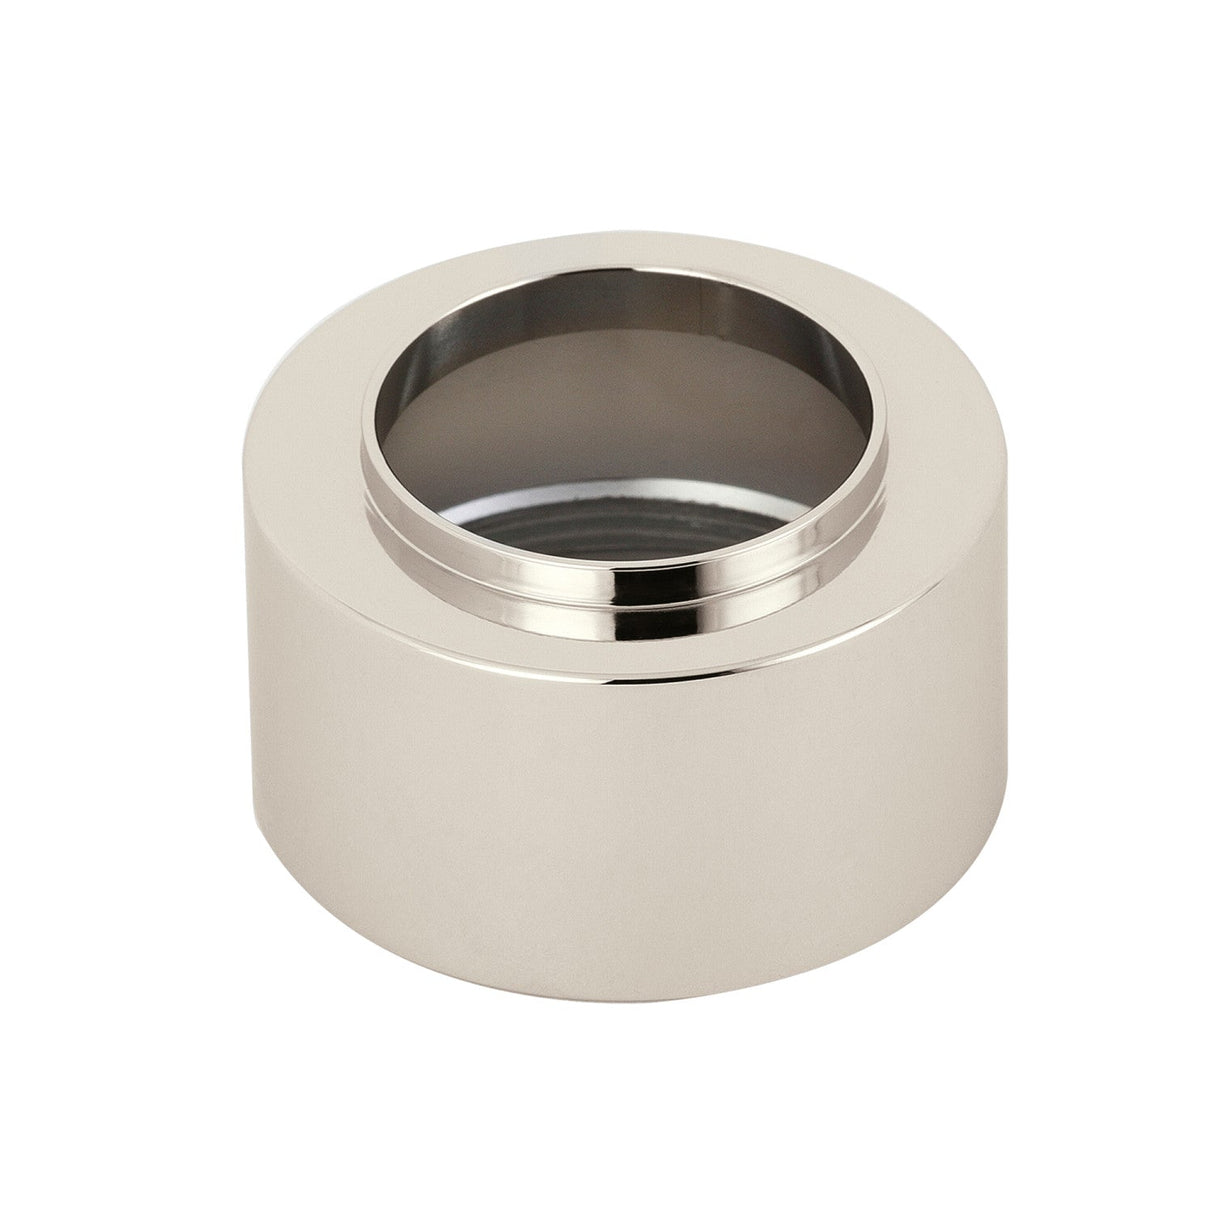 KST3036 Sleeve for Tub and Shower Faucet, Polished Nickel